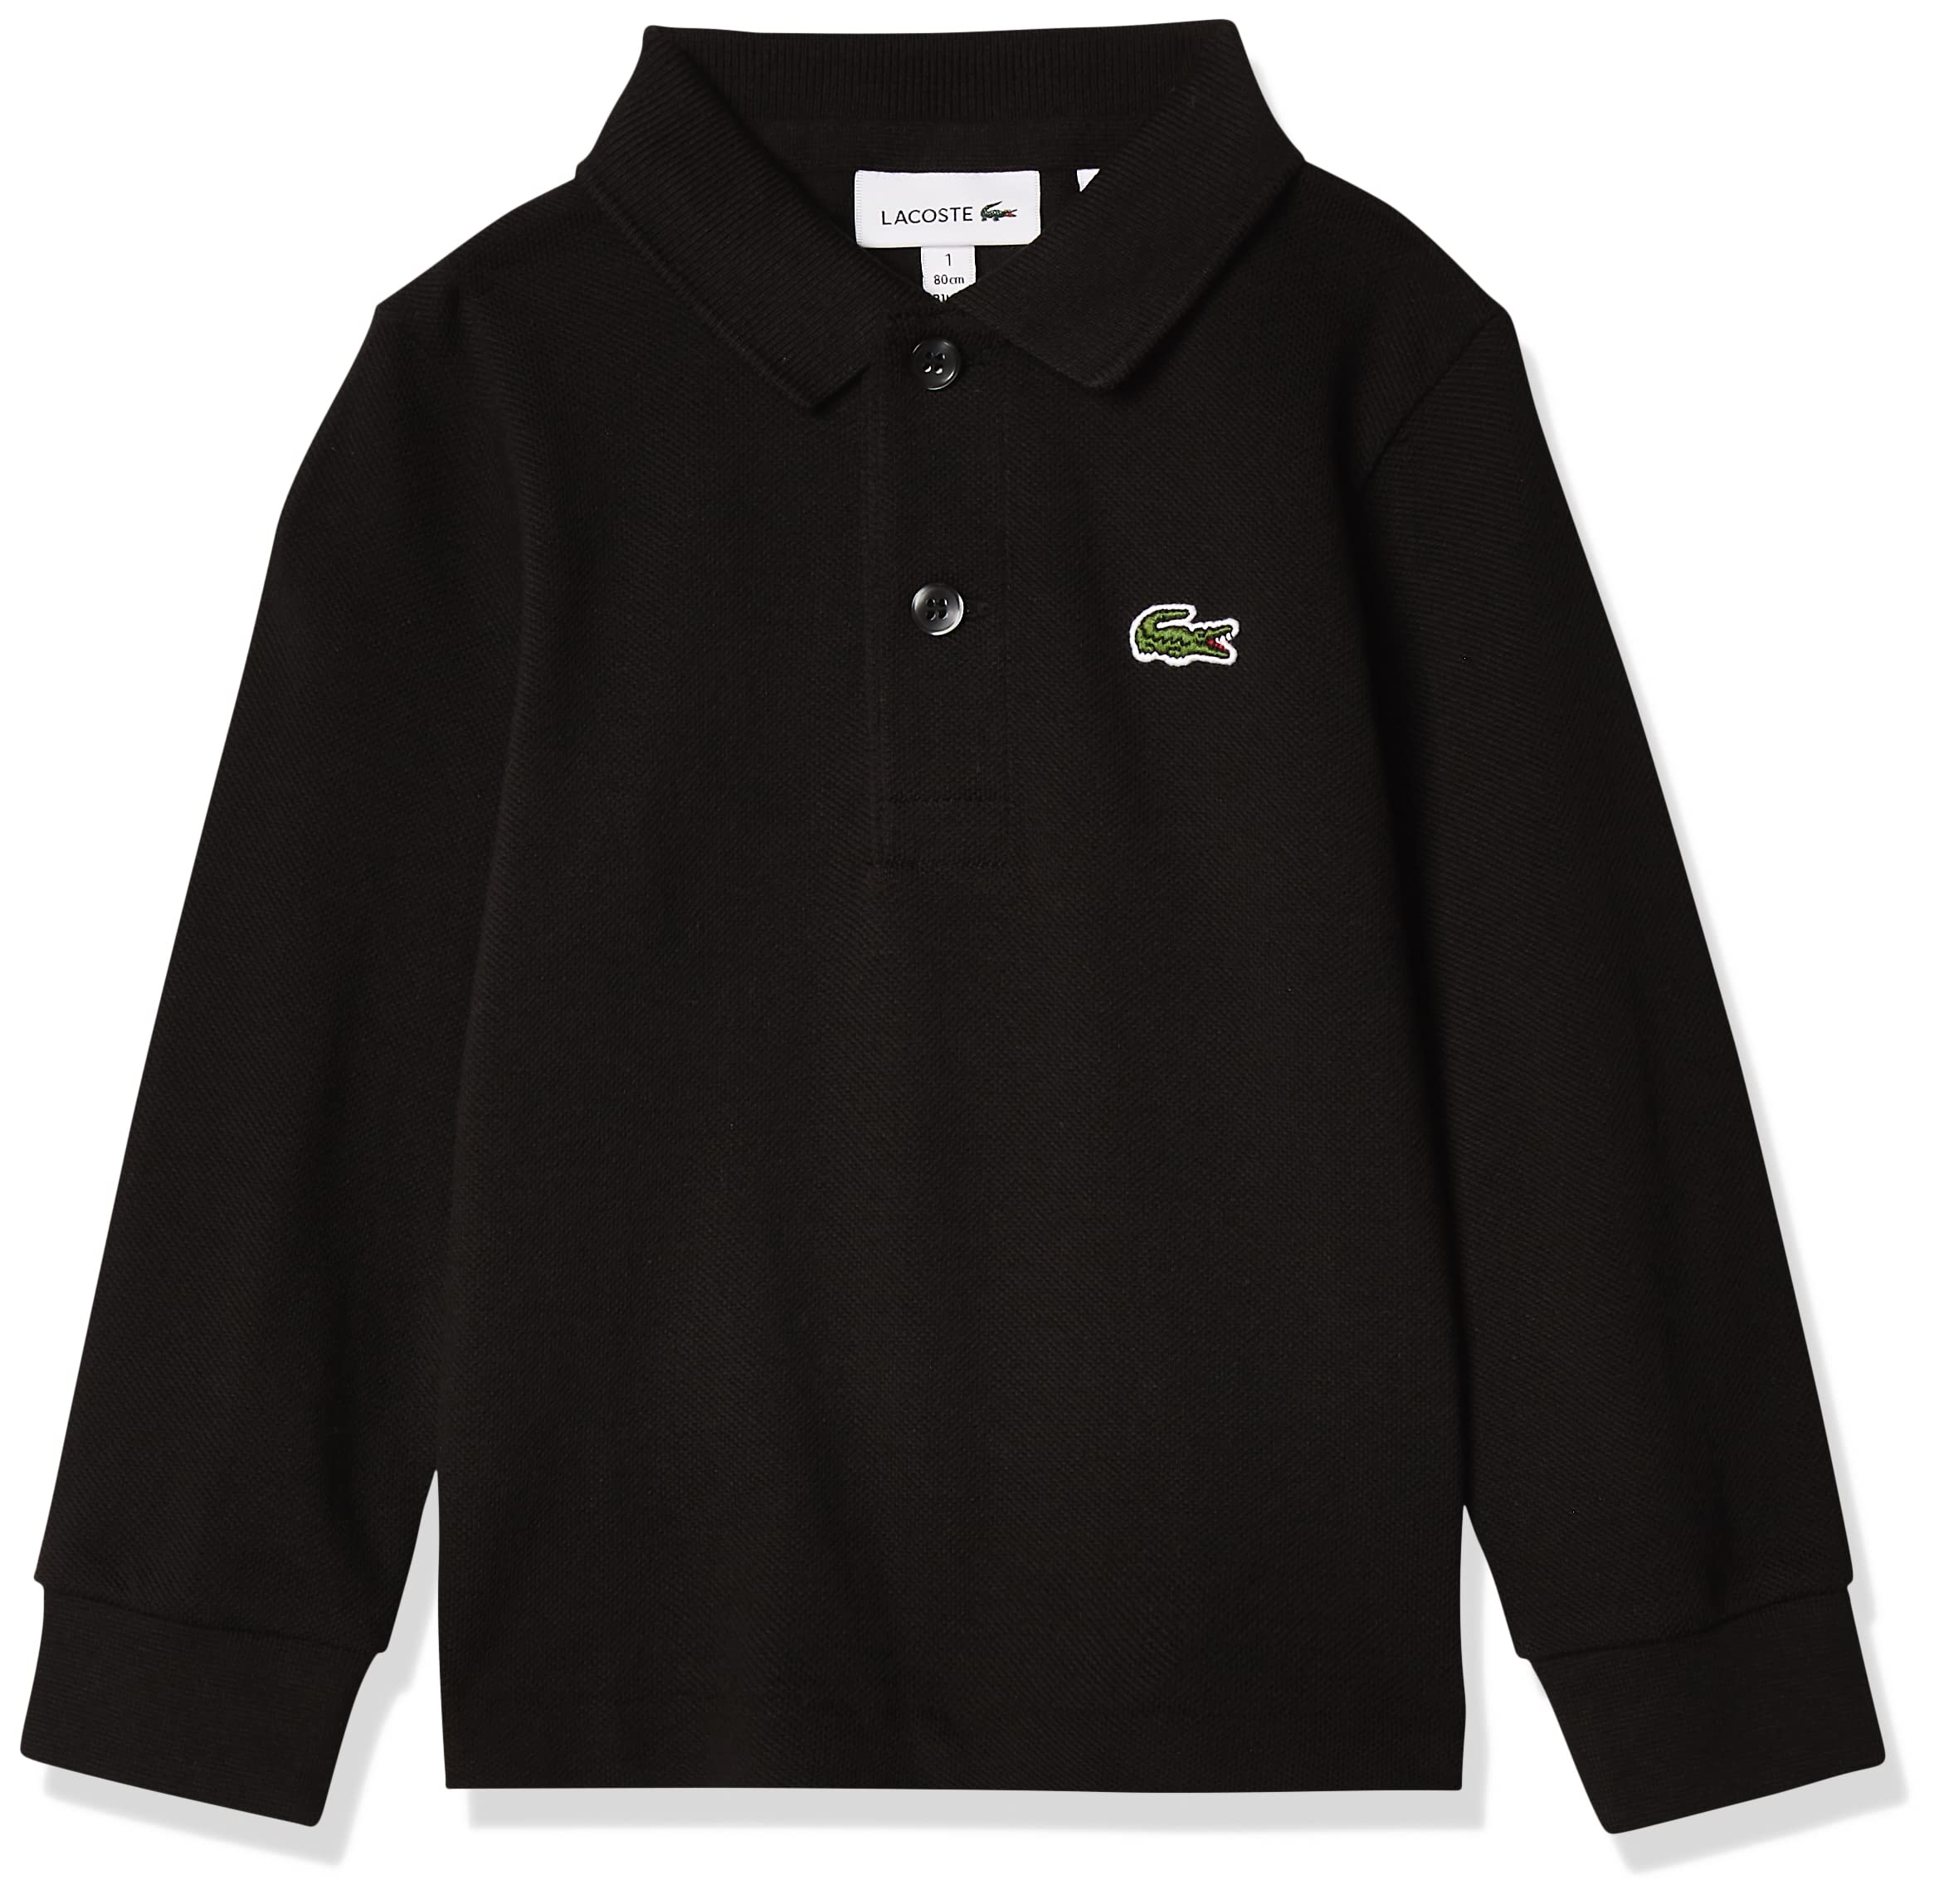 Lacoste Boys' Big Long Sleeve Classic Solid Pique Polo